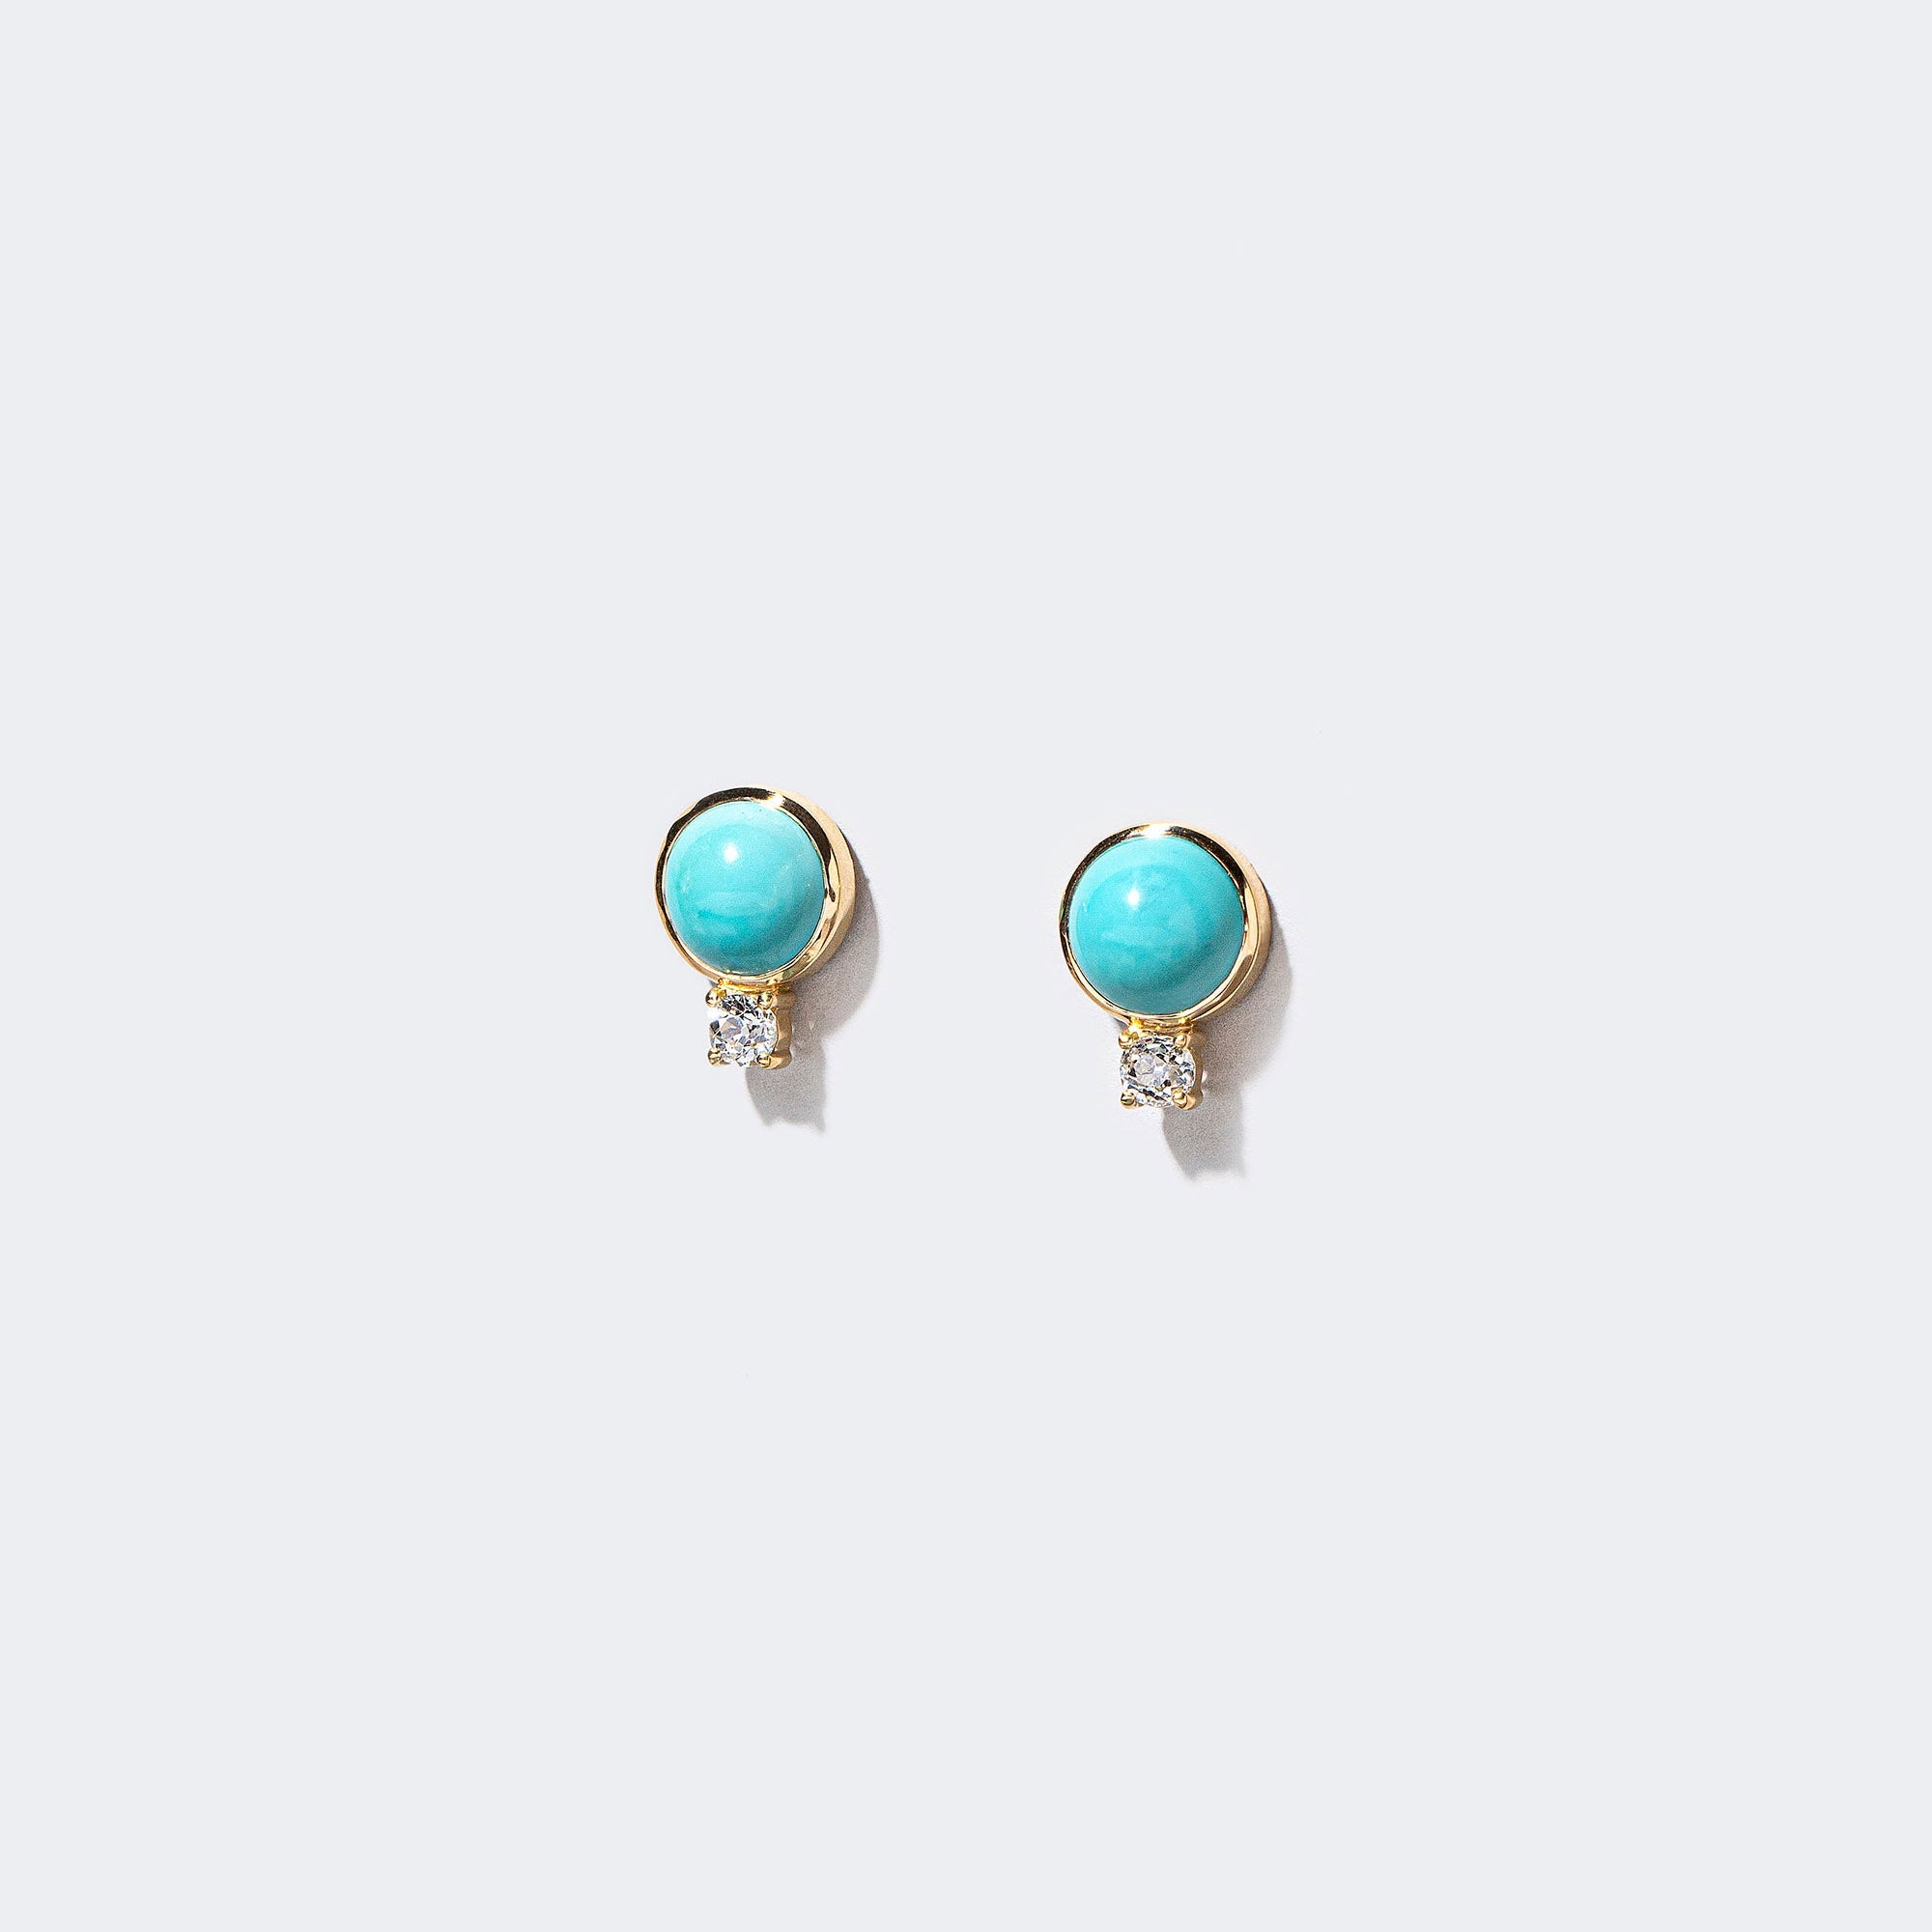 product_details:: In-Between Earrings on light color background.